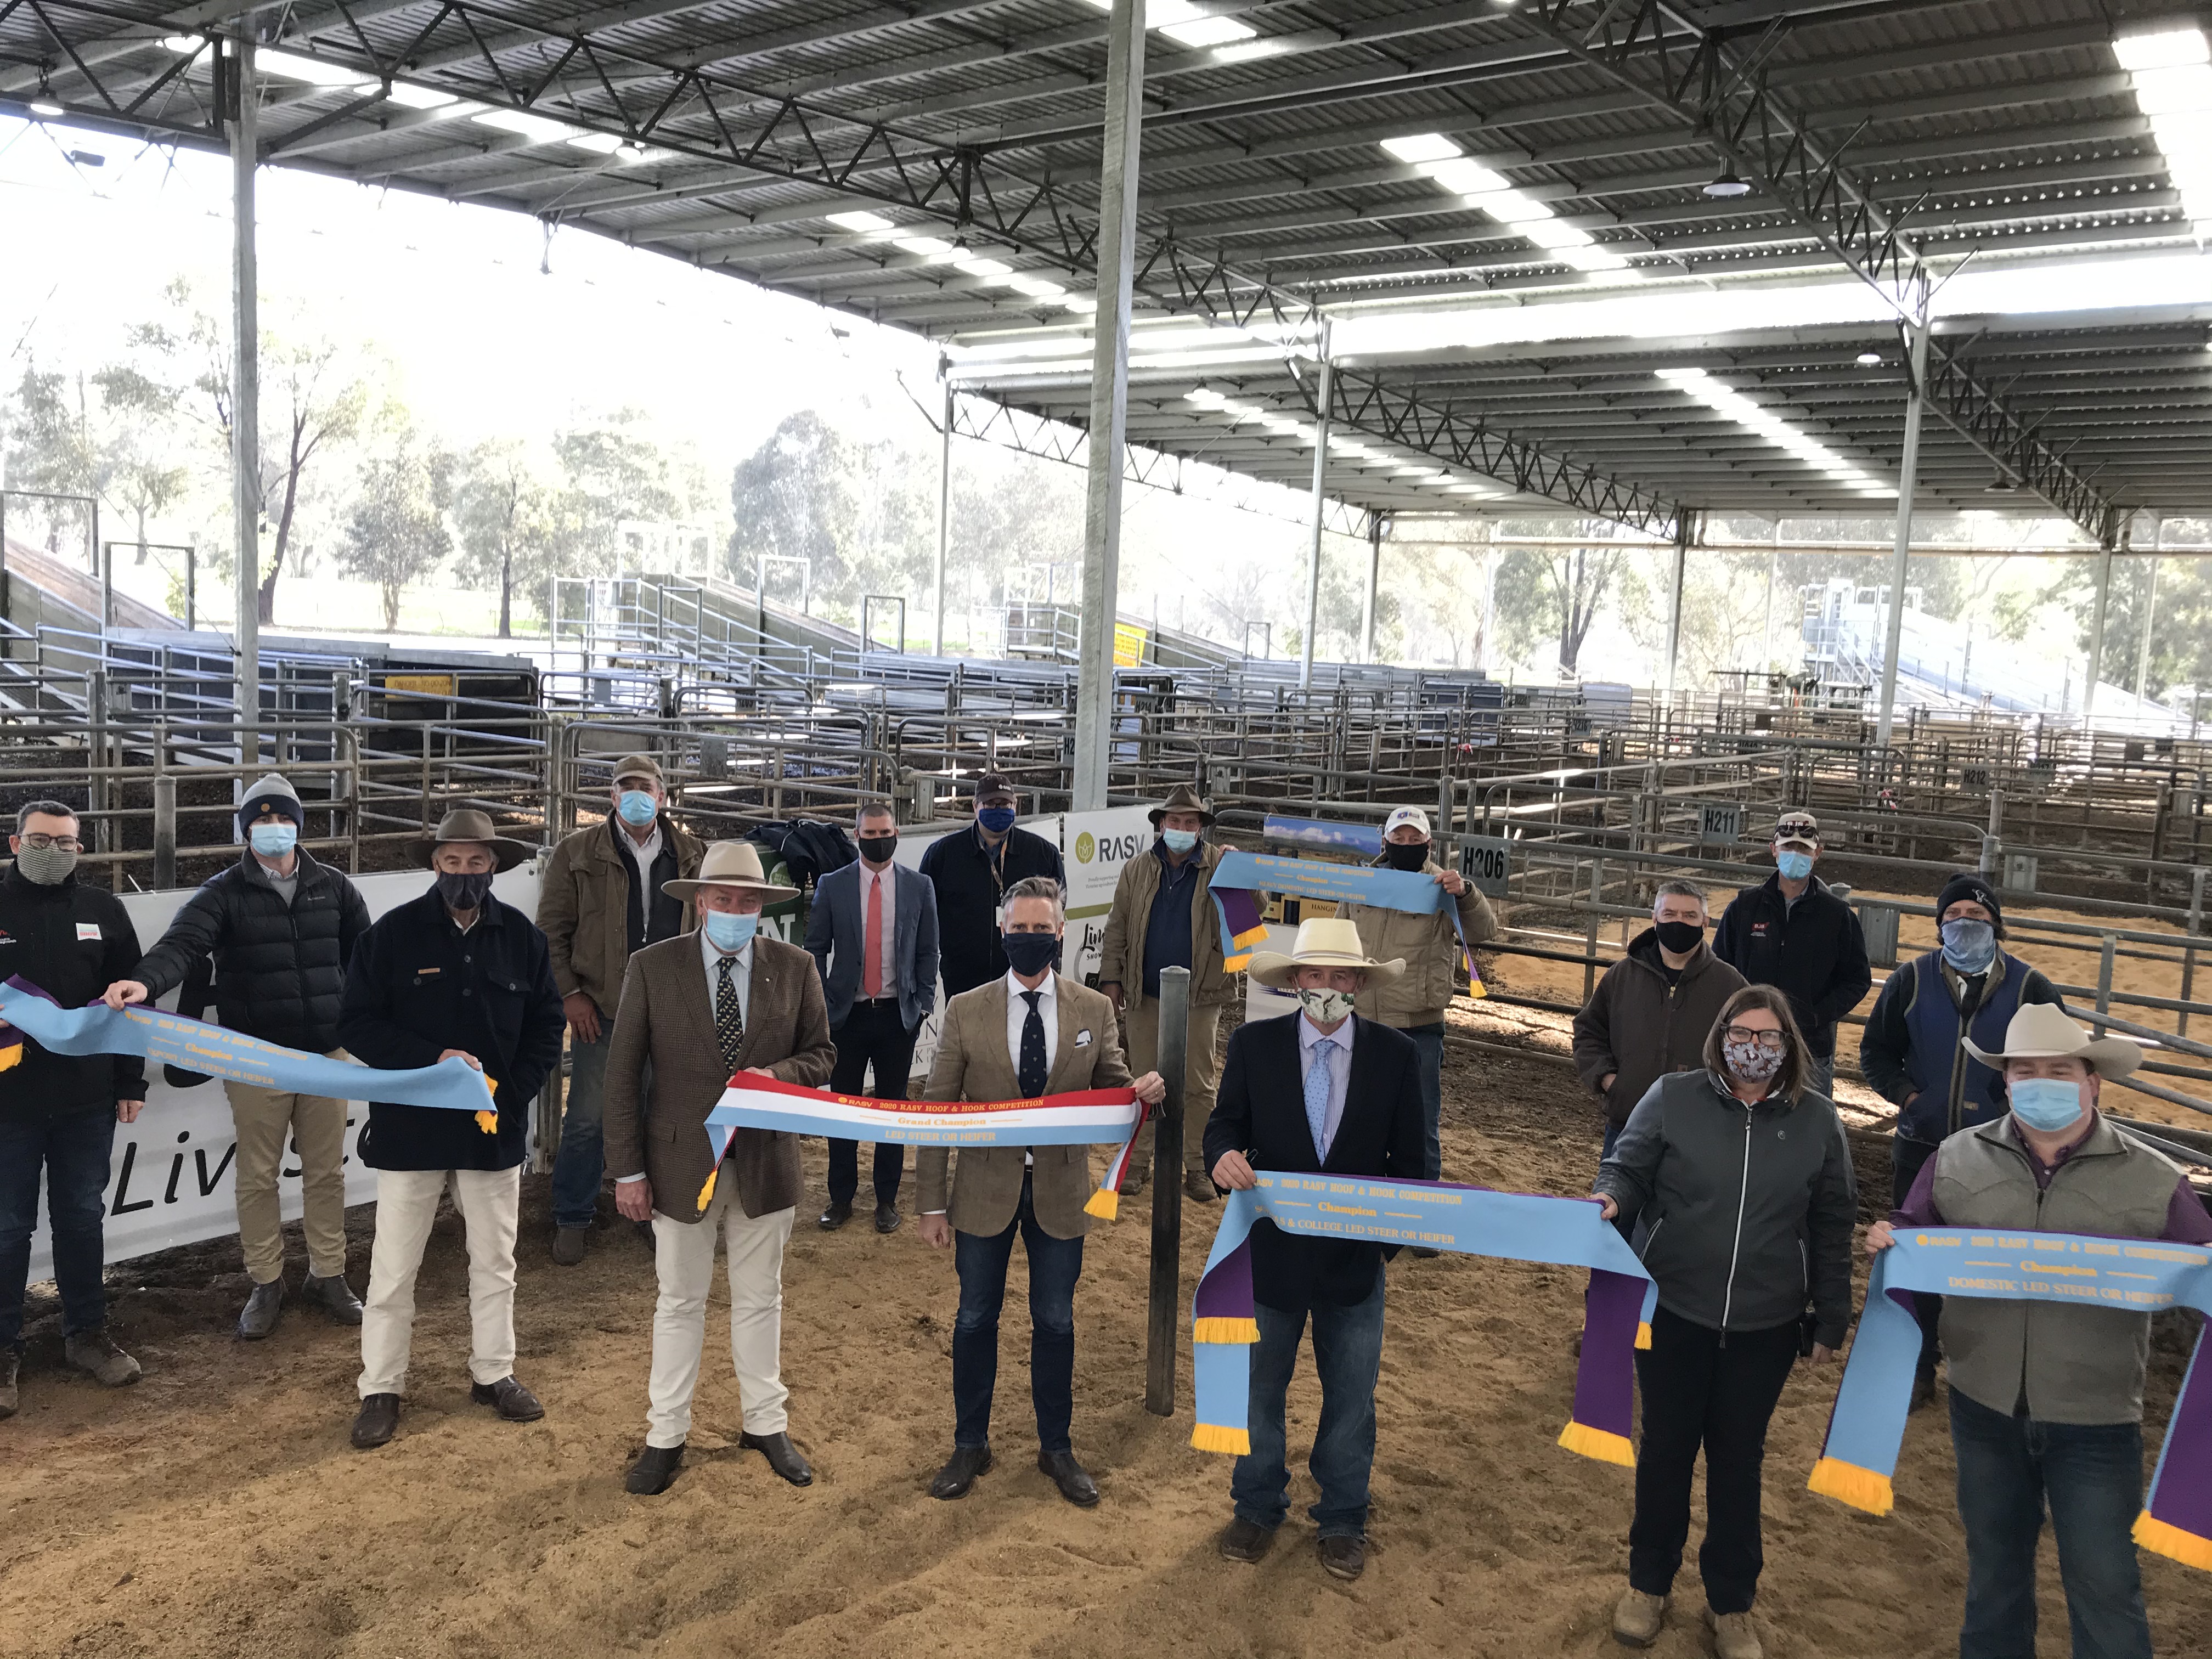 RASV Hoof and Hook Competition judged at Yea Saleyards. September 26, 2020